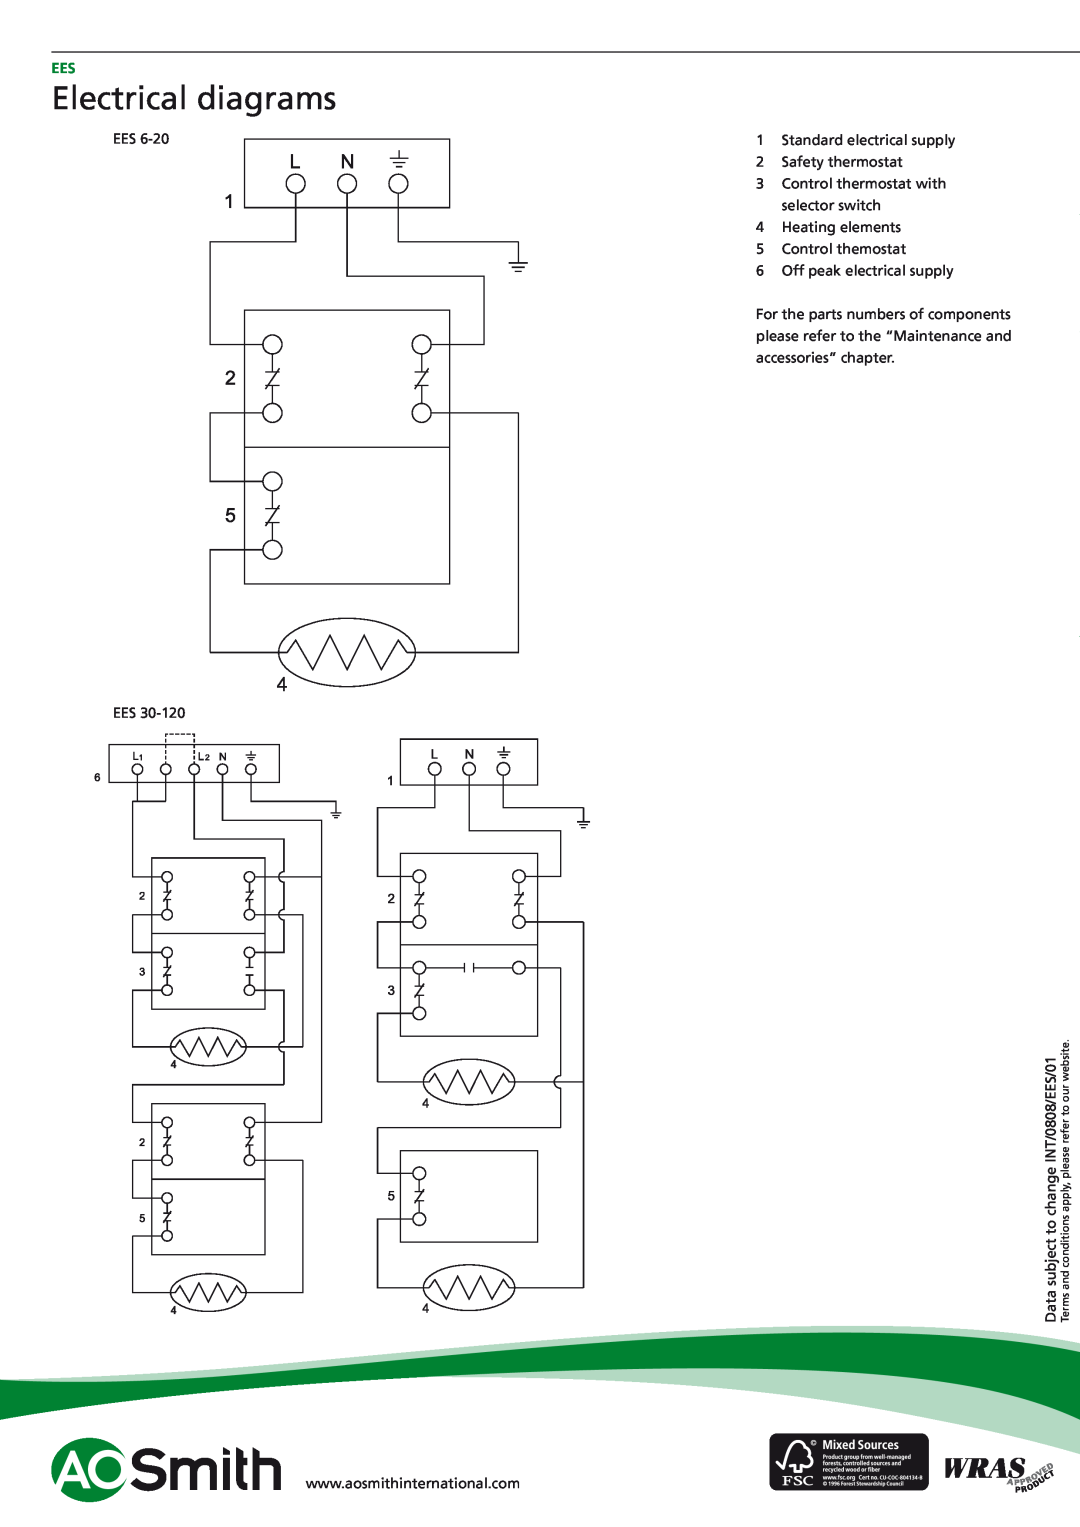 A.O. Smith EES - 40, EES - 6 Electrical diagrams, Ees Ees, Standard electrical supply 2 Safety thermostat, Data, Terms 